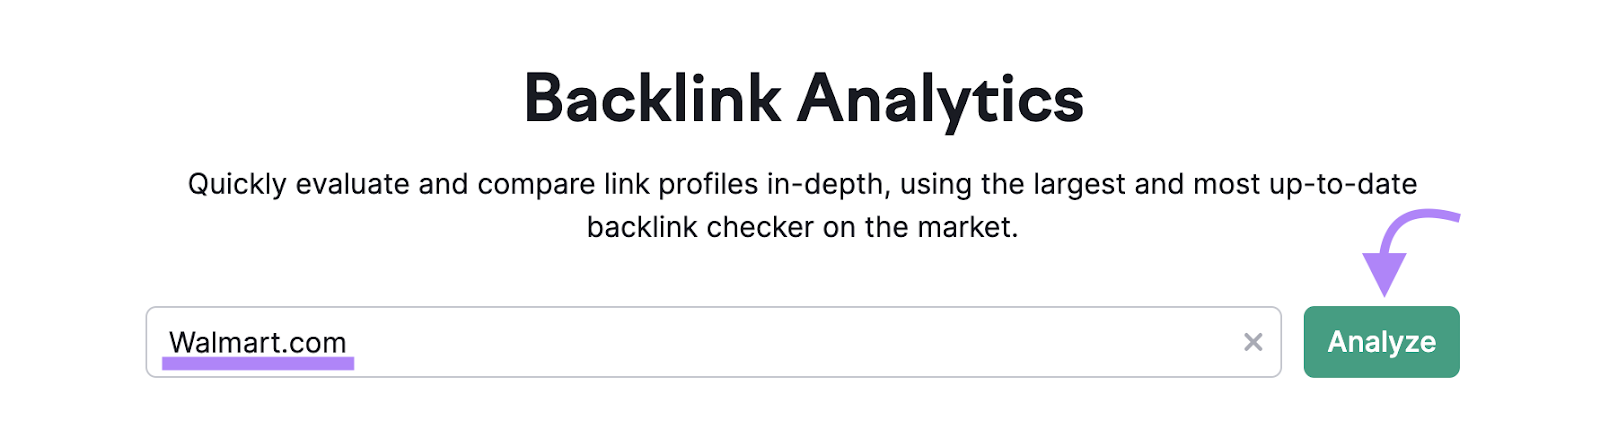 search for "walmart.com" in Backlink Analytics tool